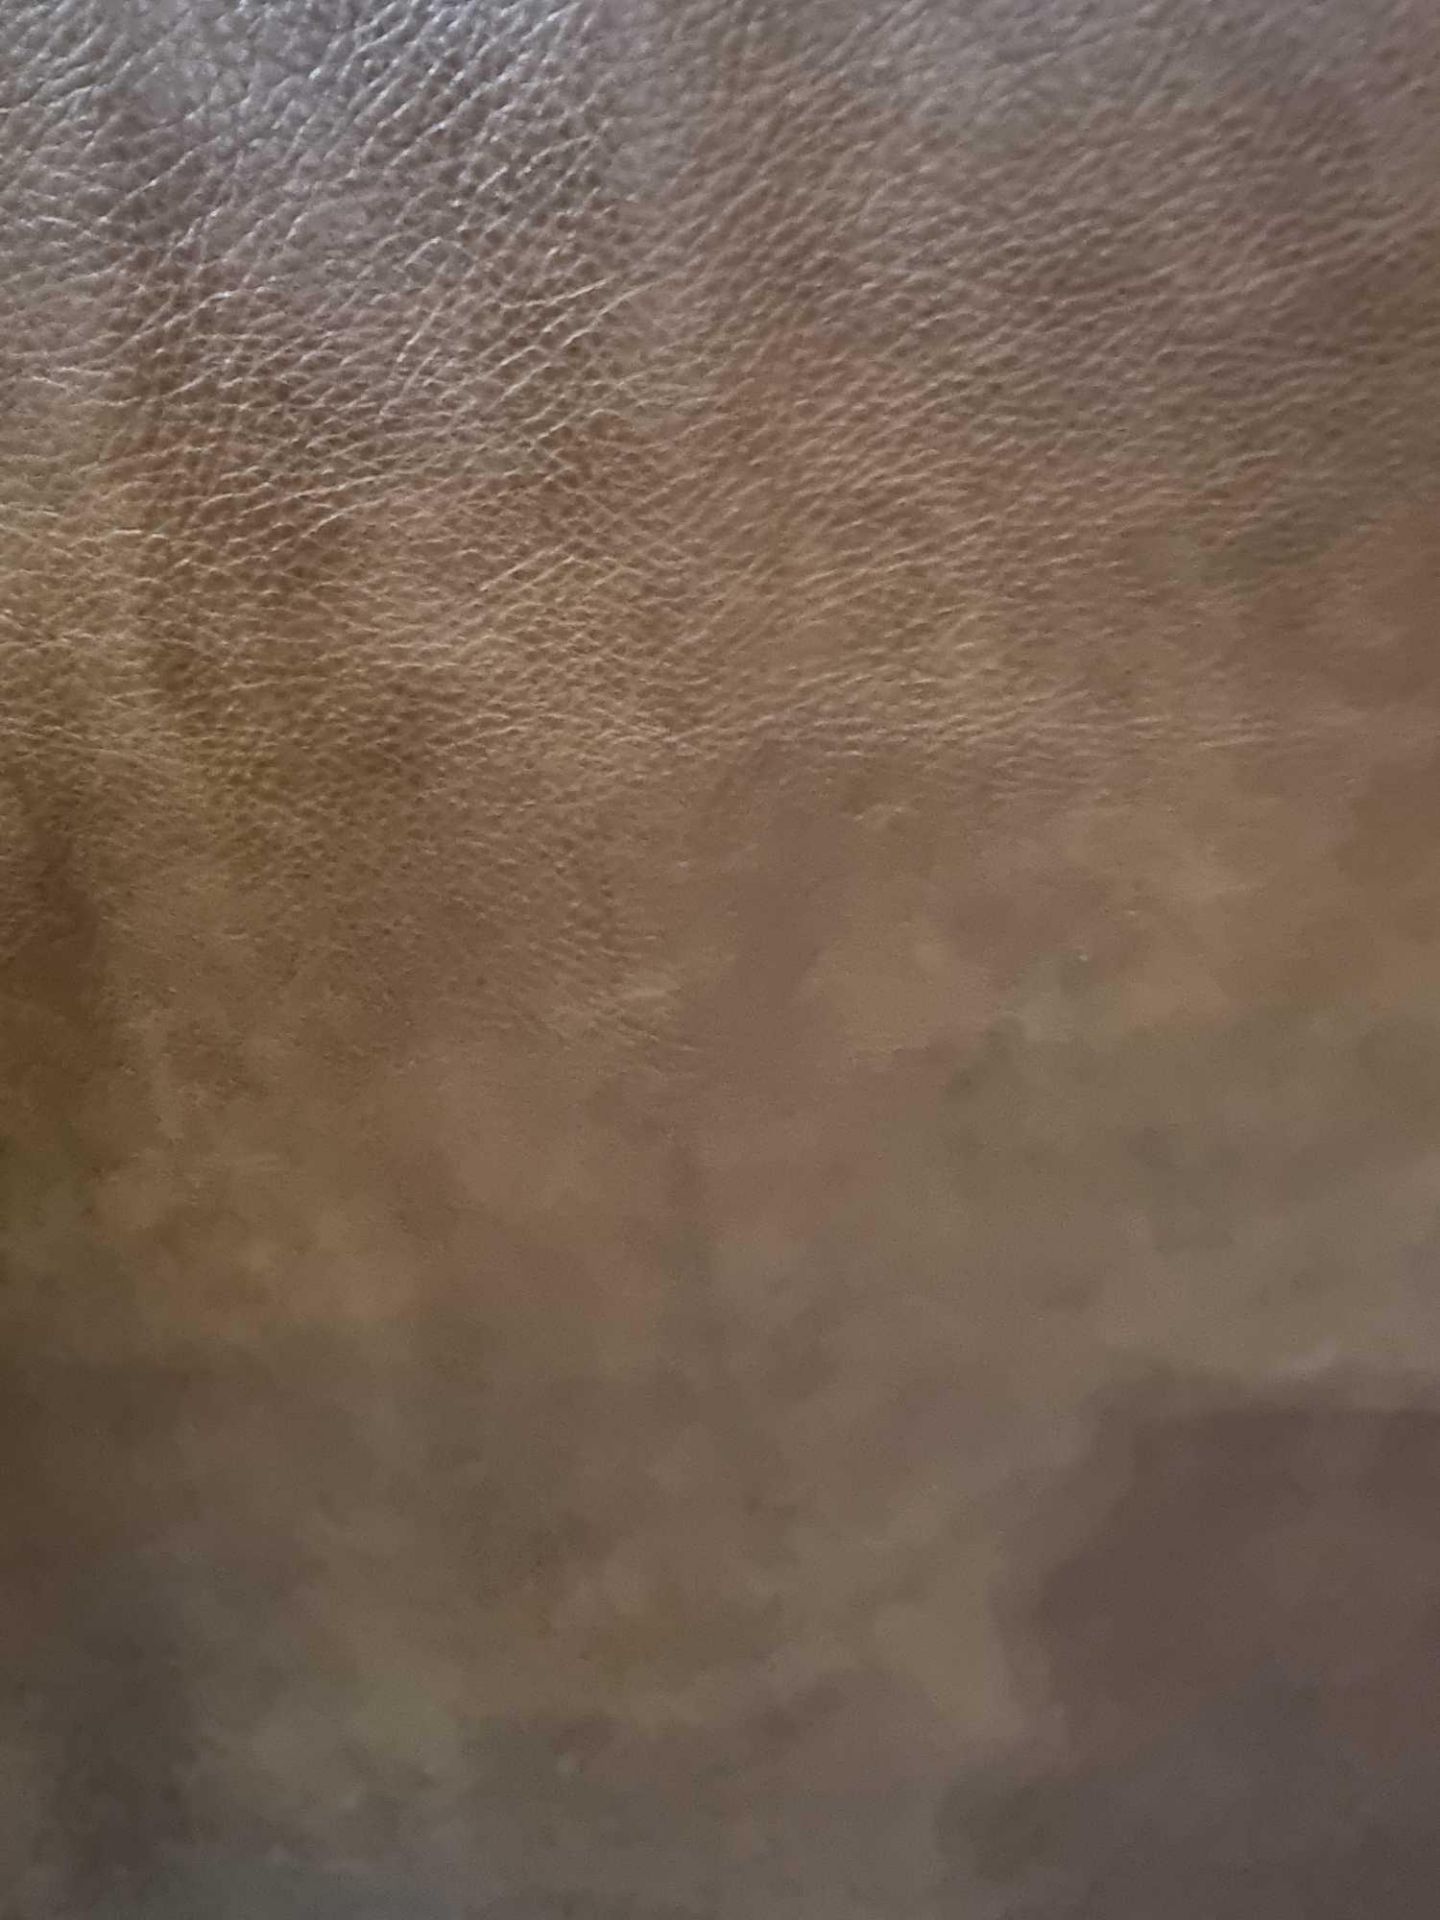 Cigar Brown Leather Hide approximately 4.37mÂ² 2.3 x 1.9cm - Image 2 of 2